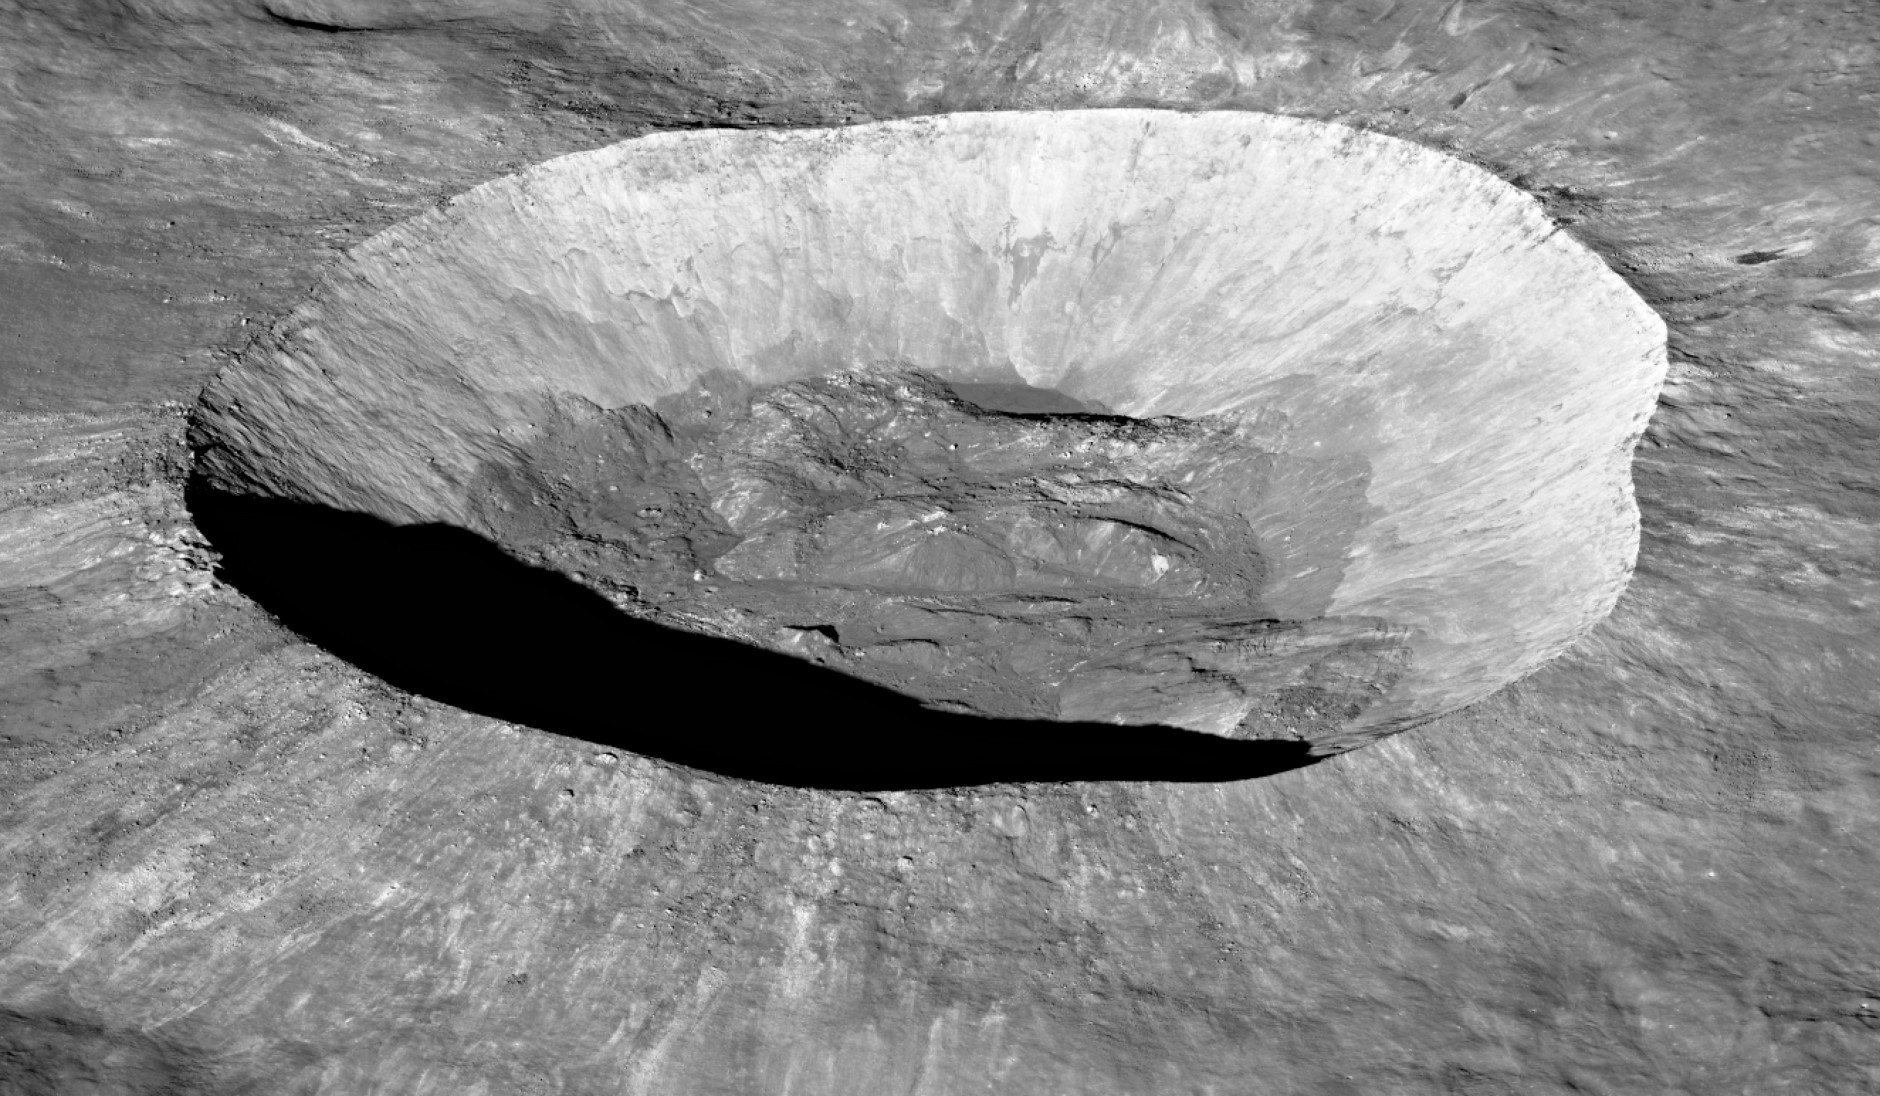 In this striking view of one of the Moon's craters, the height and sharpness of the rim are evident, as well as the crater floor's rolling hills and rugged nature. (NASA/Goddard Space Flight Center/Arizona State University)